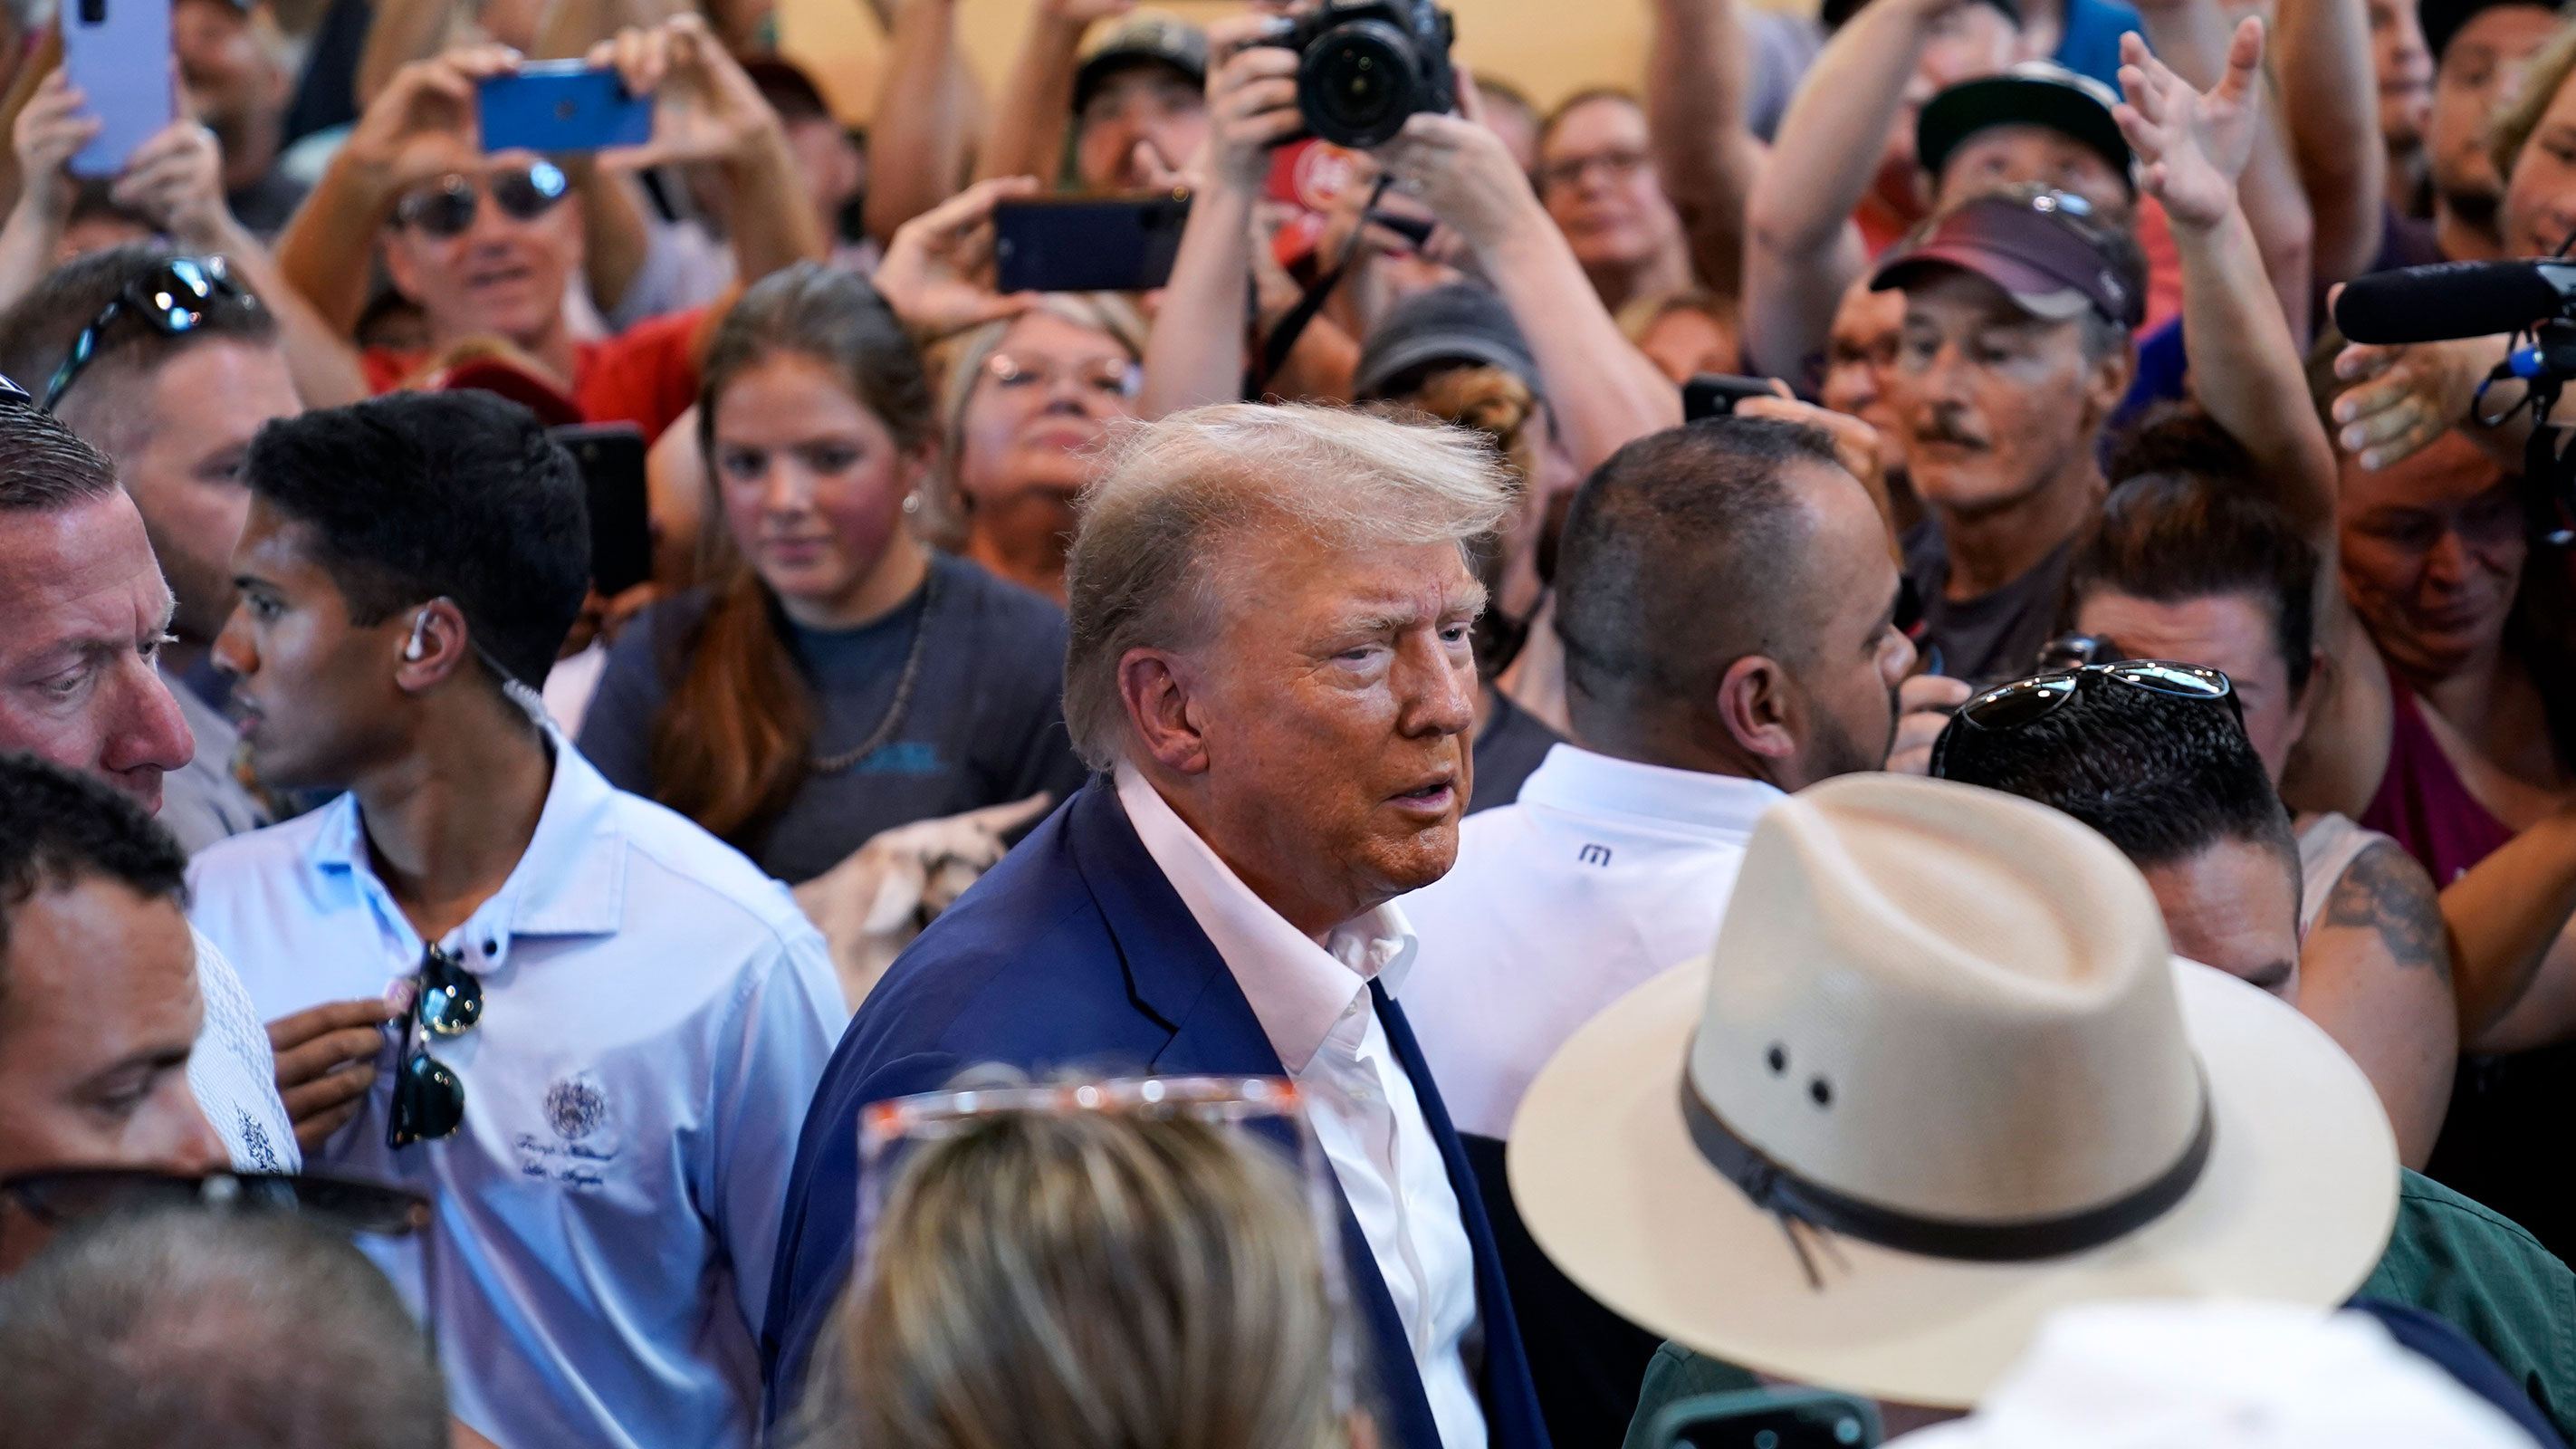 Republican presidential candidate former President Donald Trump greets supporters at the Iowa Pork Producers tent during a visit to the Iowa State Fair, Saturday, Aug. 12, 2023, in Des Moines, Iowa.